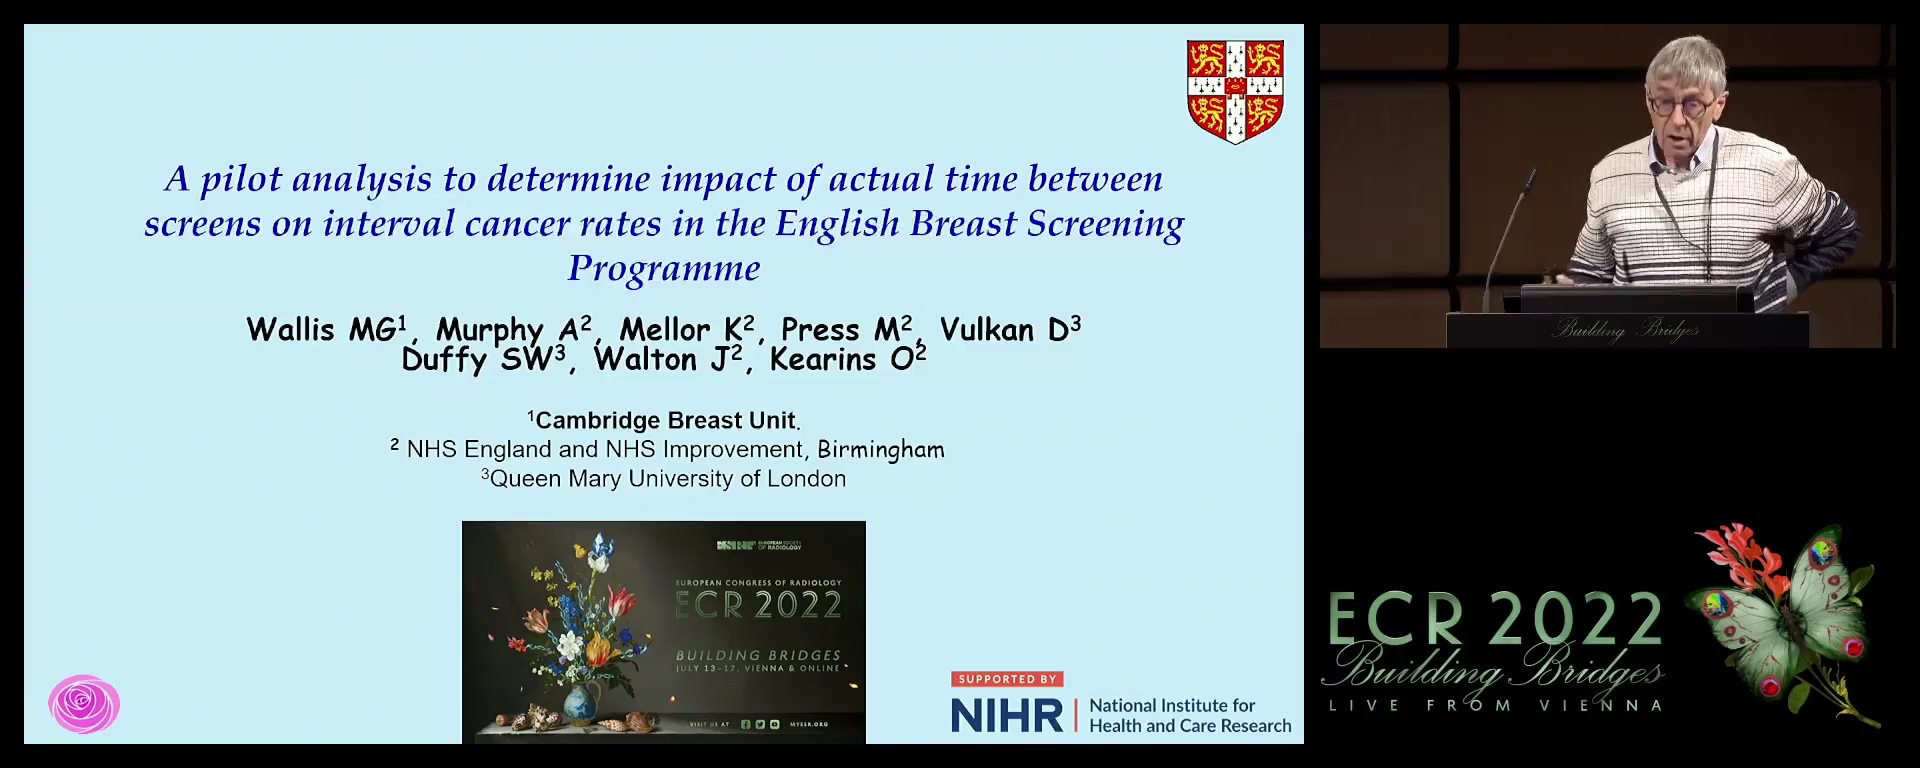 A pilot analysis to determine impact of actual time between screens on interval cancer rates in the English Breast Screening Programme